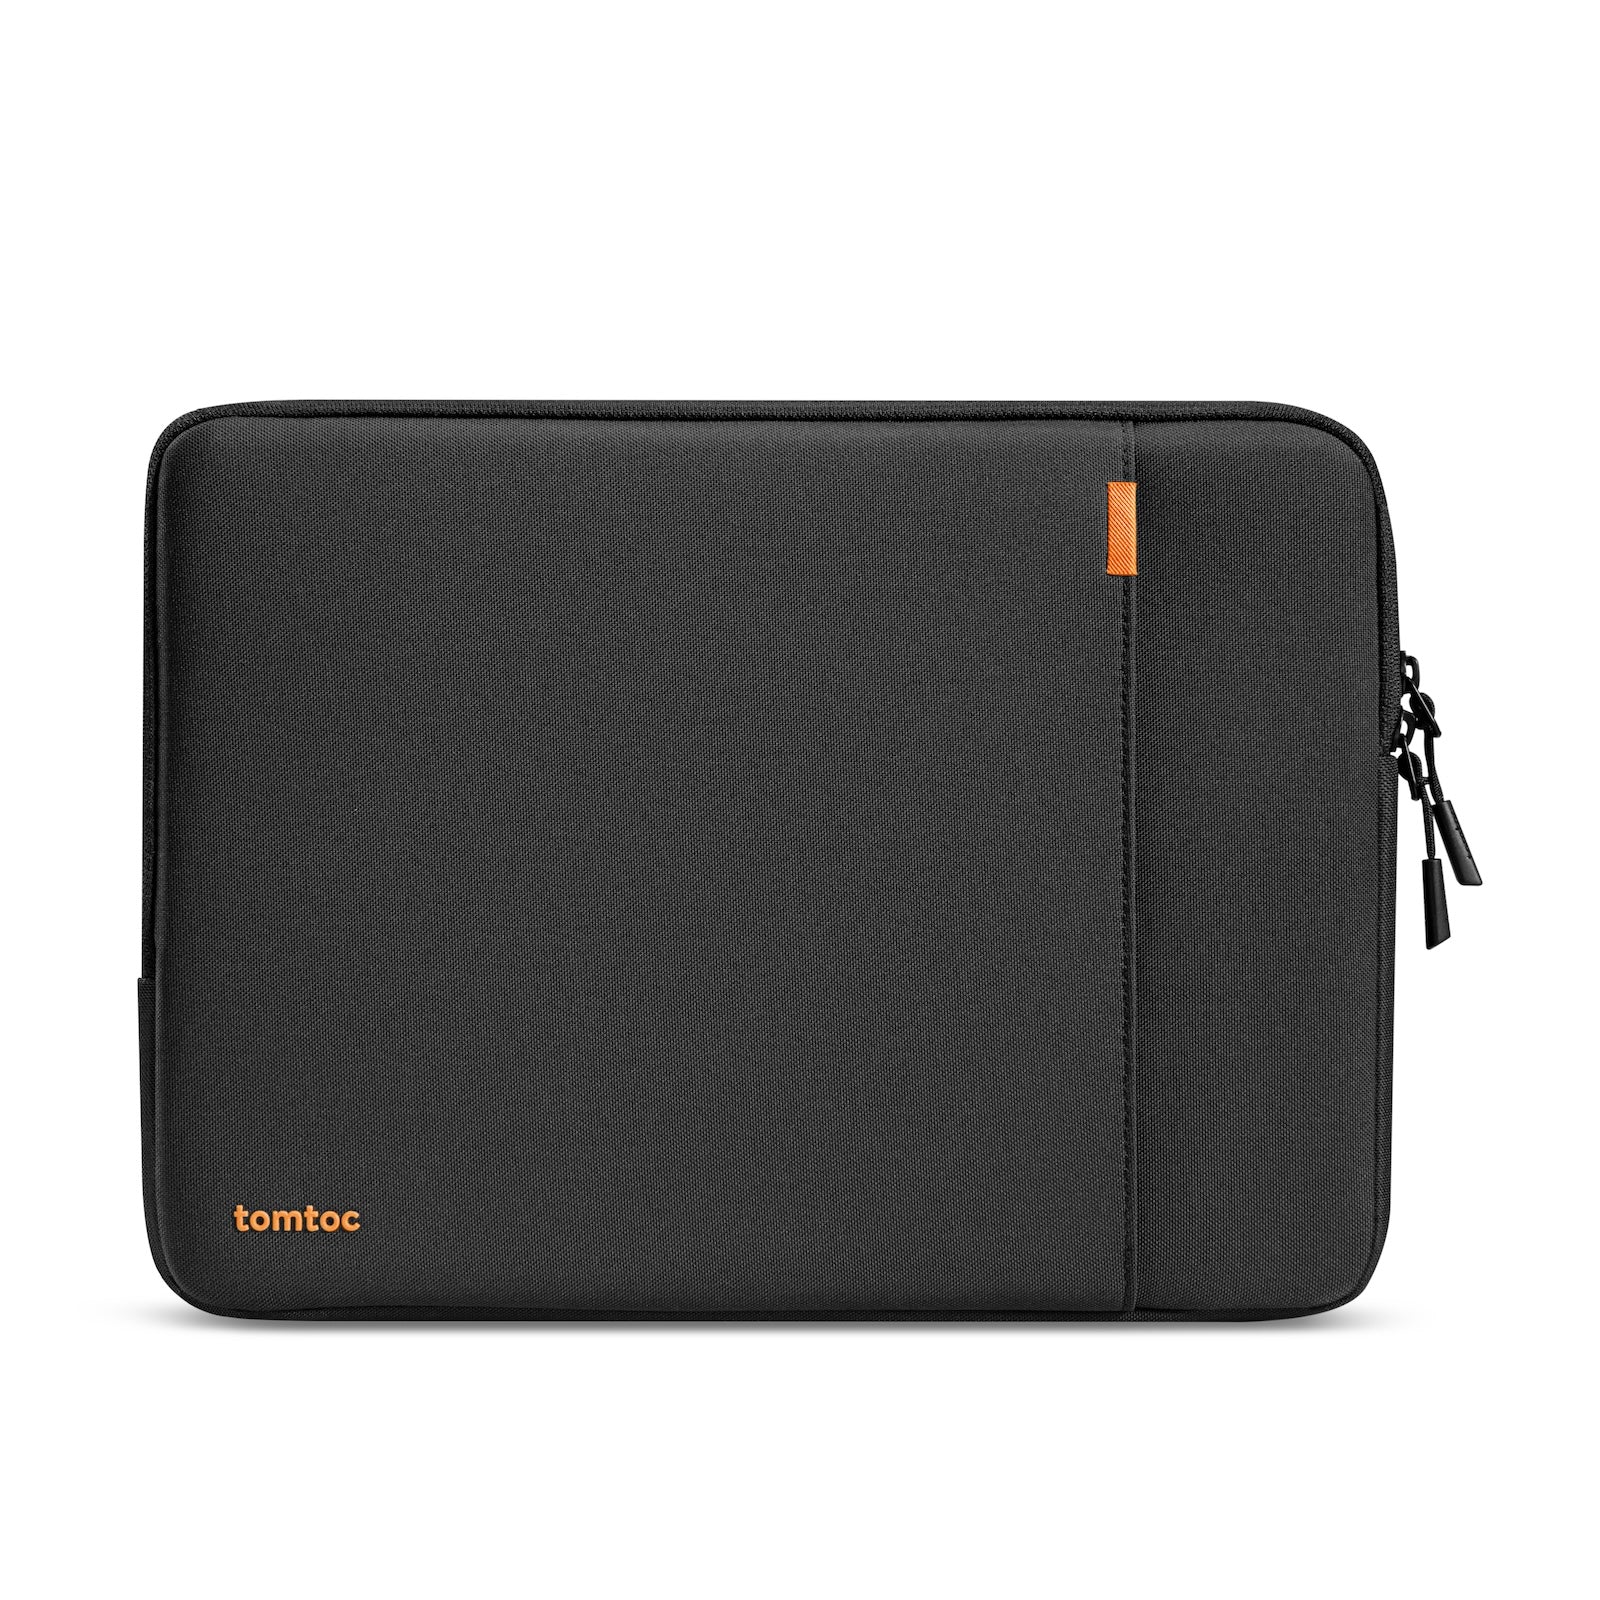 tomtoc Defender A13 Laptop Sleeve - 13inch